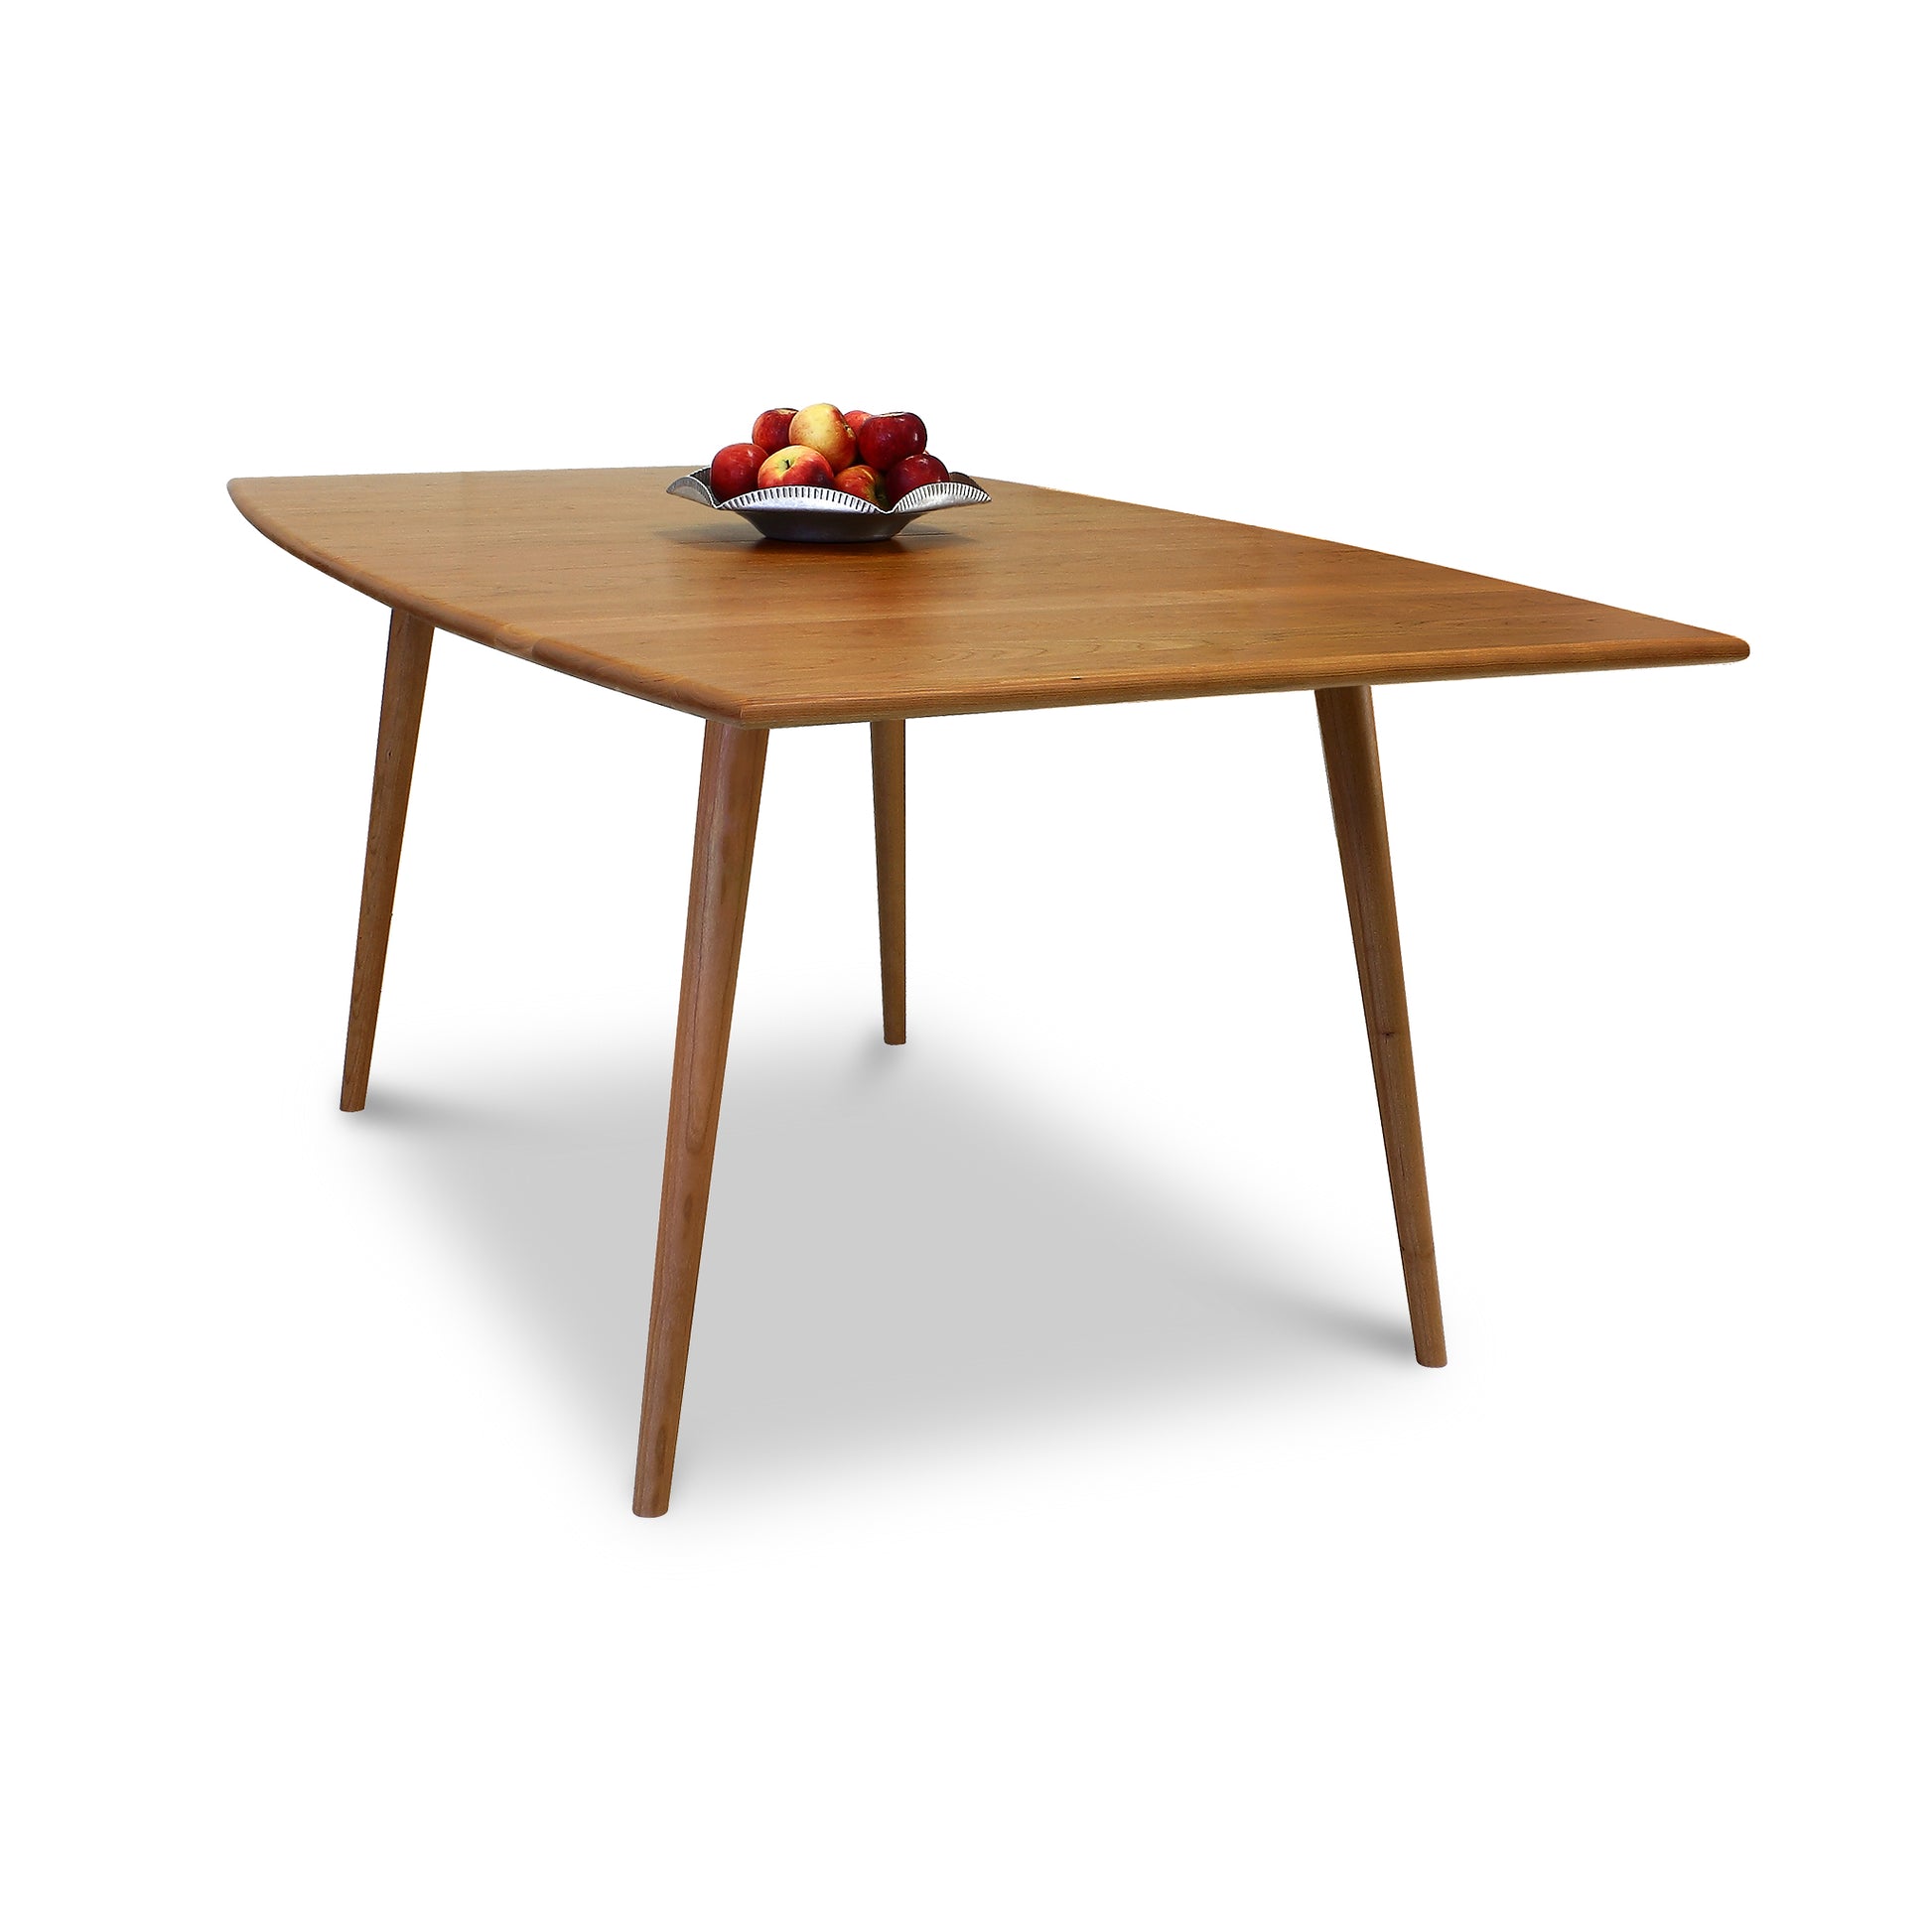 An Addison Solid Boat-Top Dining Table made of natural cherry wood, adorned with a bowl of apples, manufactured by Lyndon Furniture.